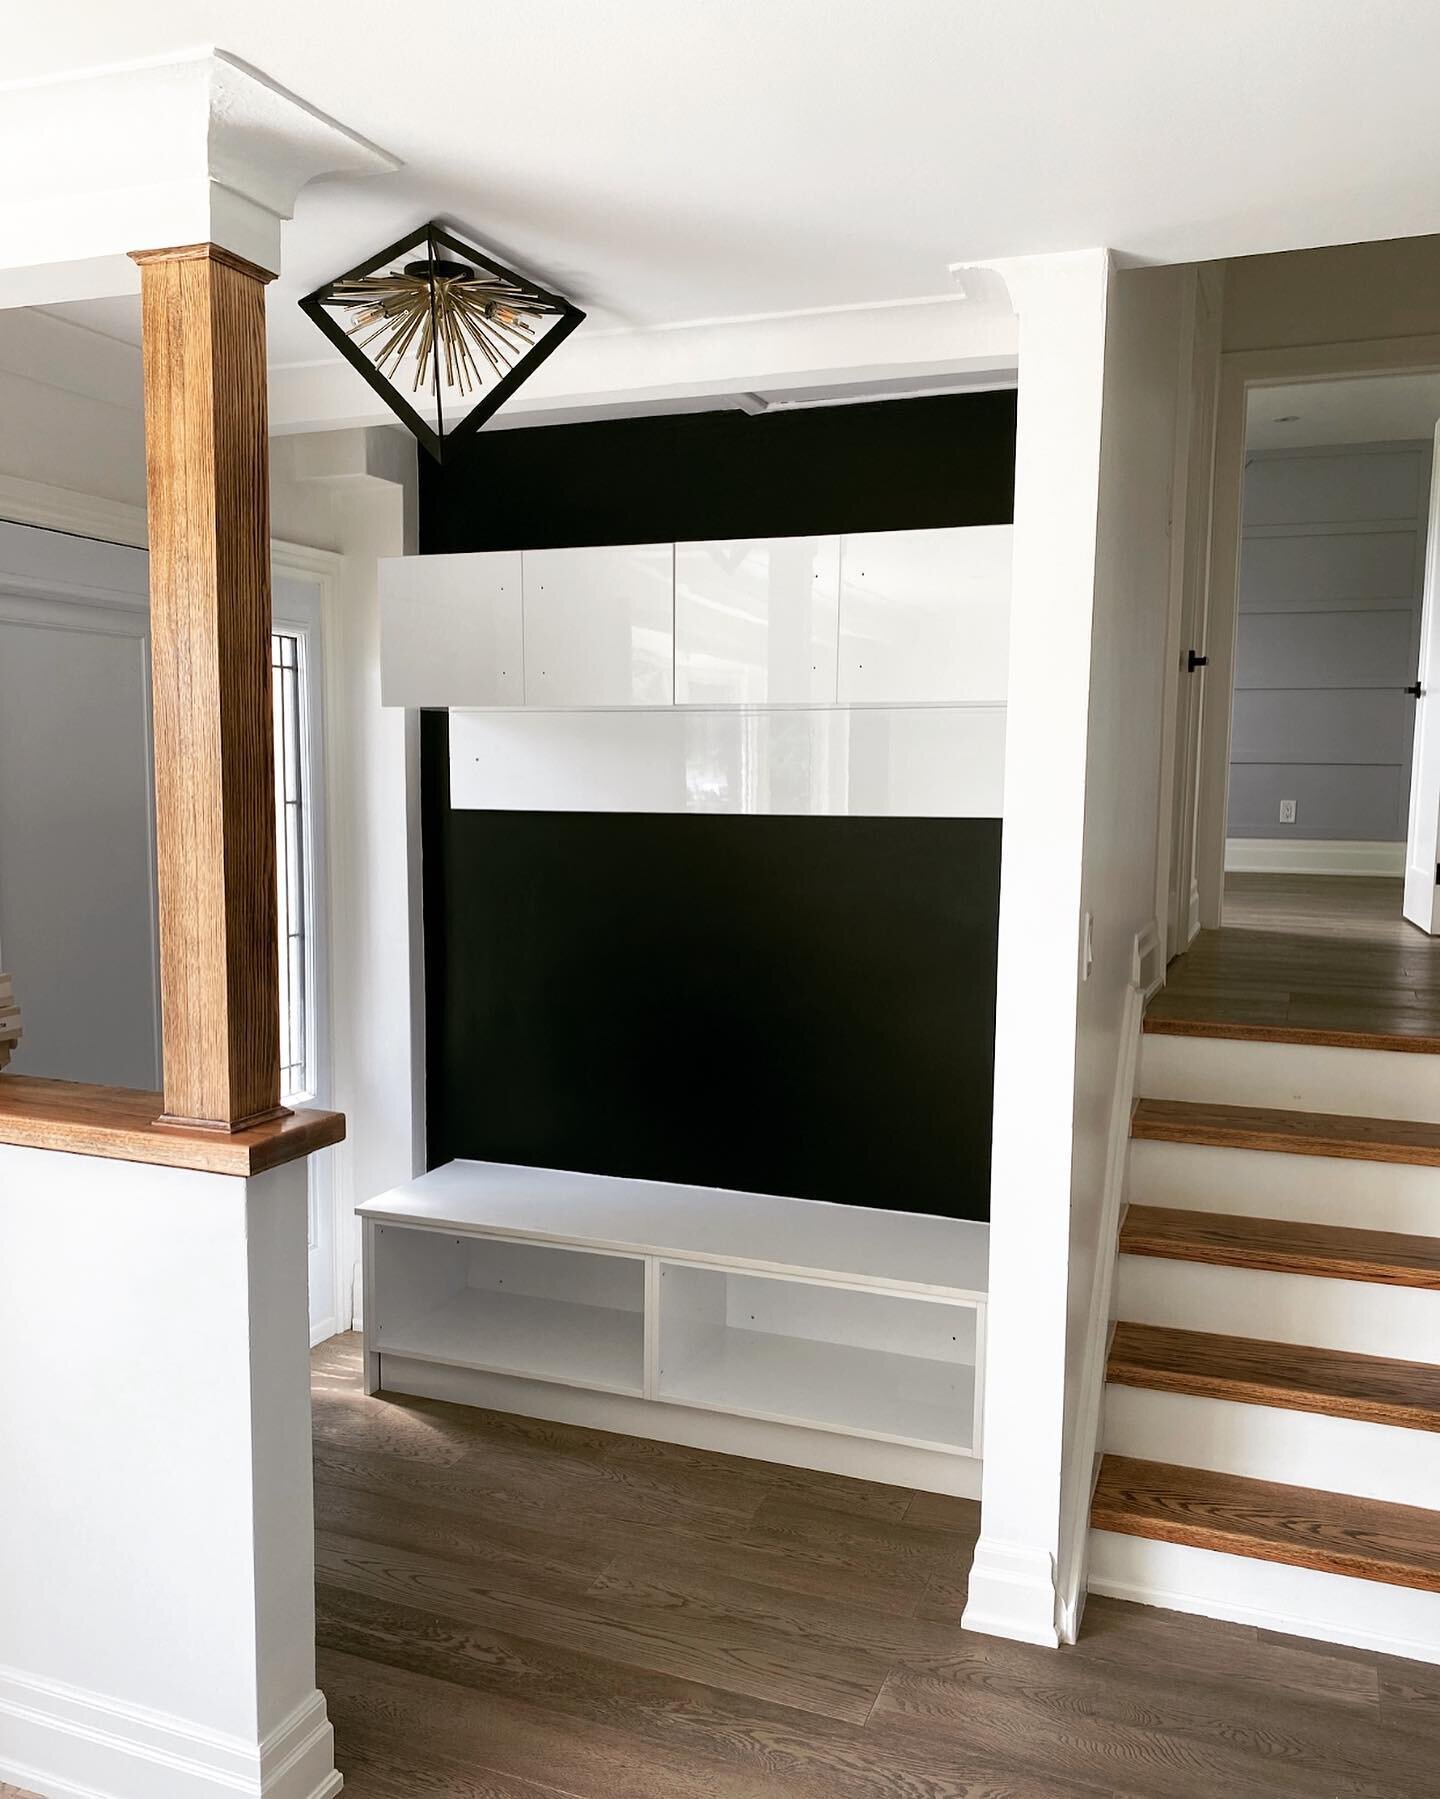 I promise this is the same mudroom. Small change but massive results. Pictures of the final product coming soon &gt;&gt;

#CrosslinkHomes #CustomHomes #Renovations #Mudroom #Bench #Quartz #Paint